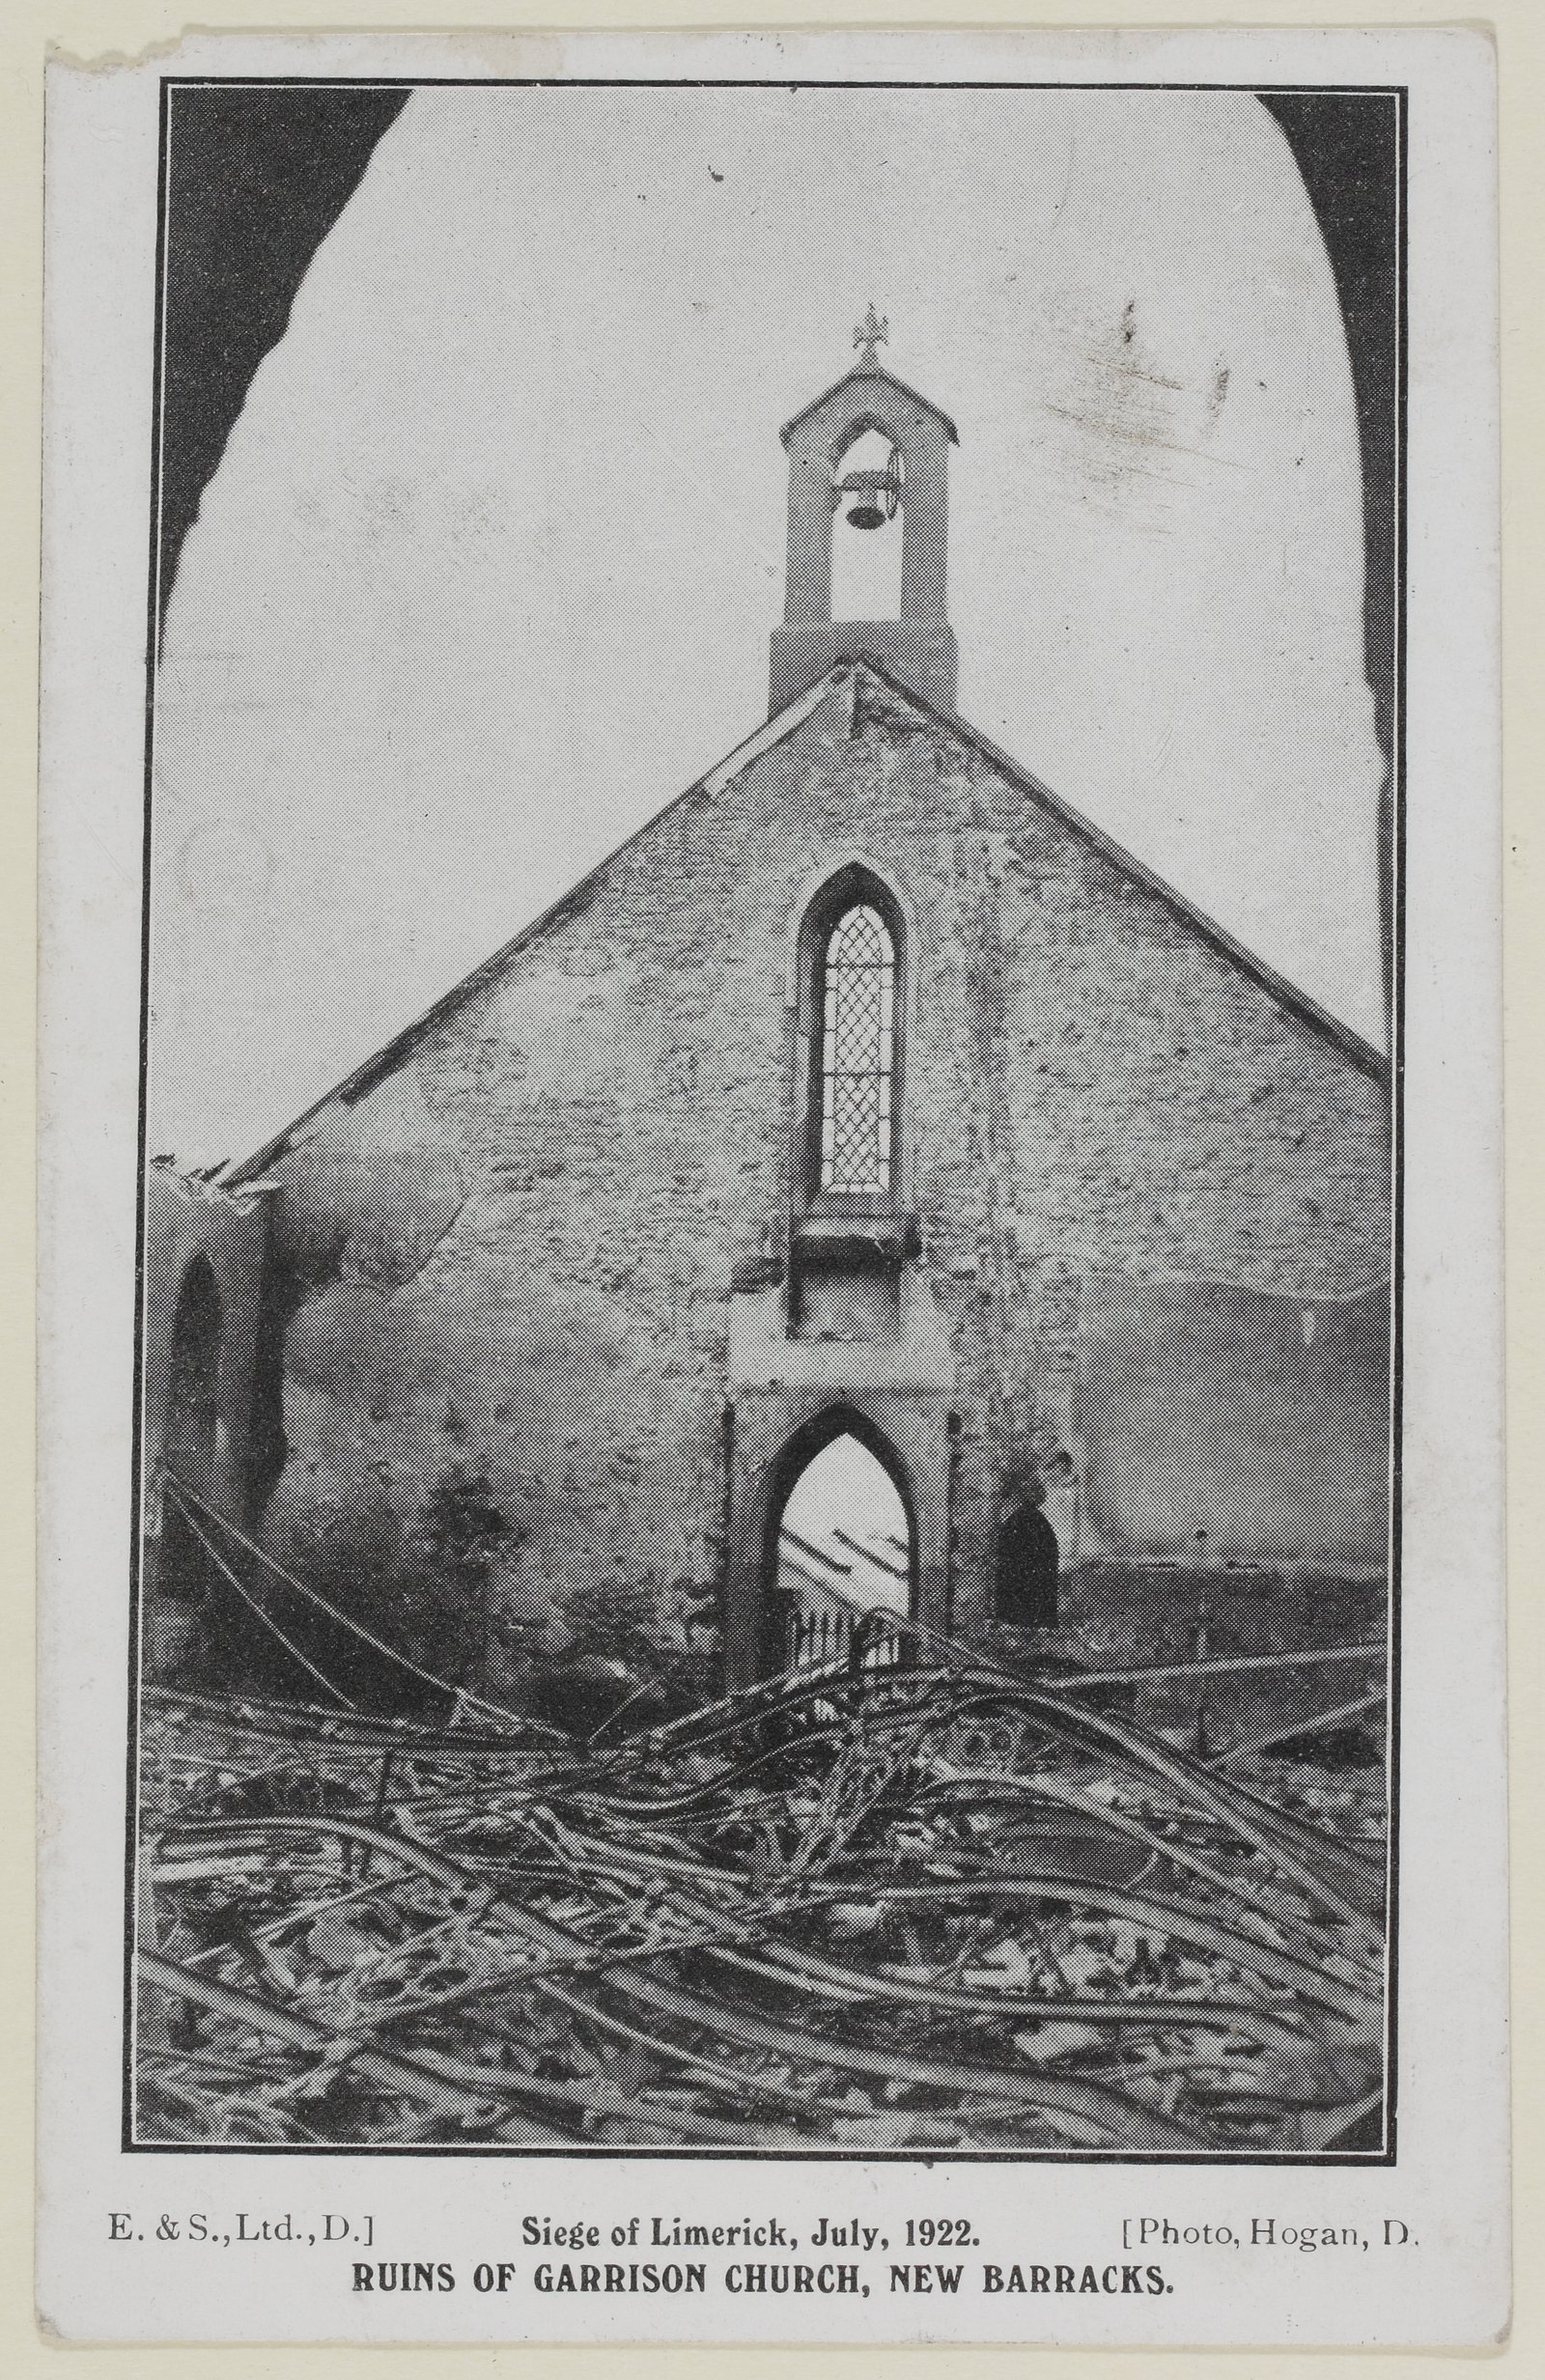 Image - A photograph taken by D. Hogan of the ruins of the Garrison Church barracks in Limerick in July 1922. Image courtesy of the National Library of Ireland